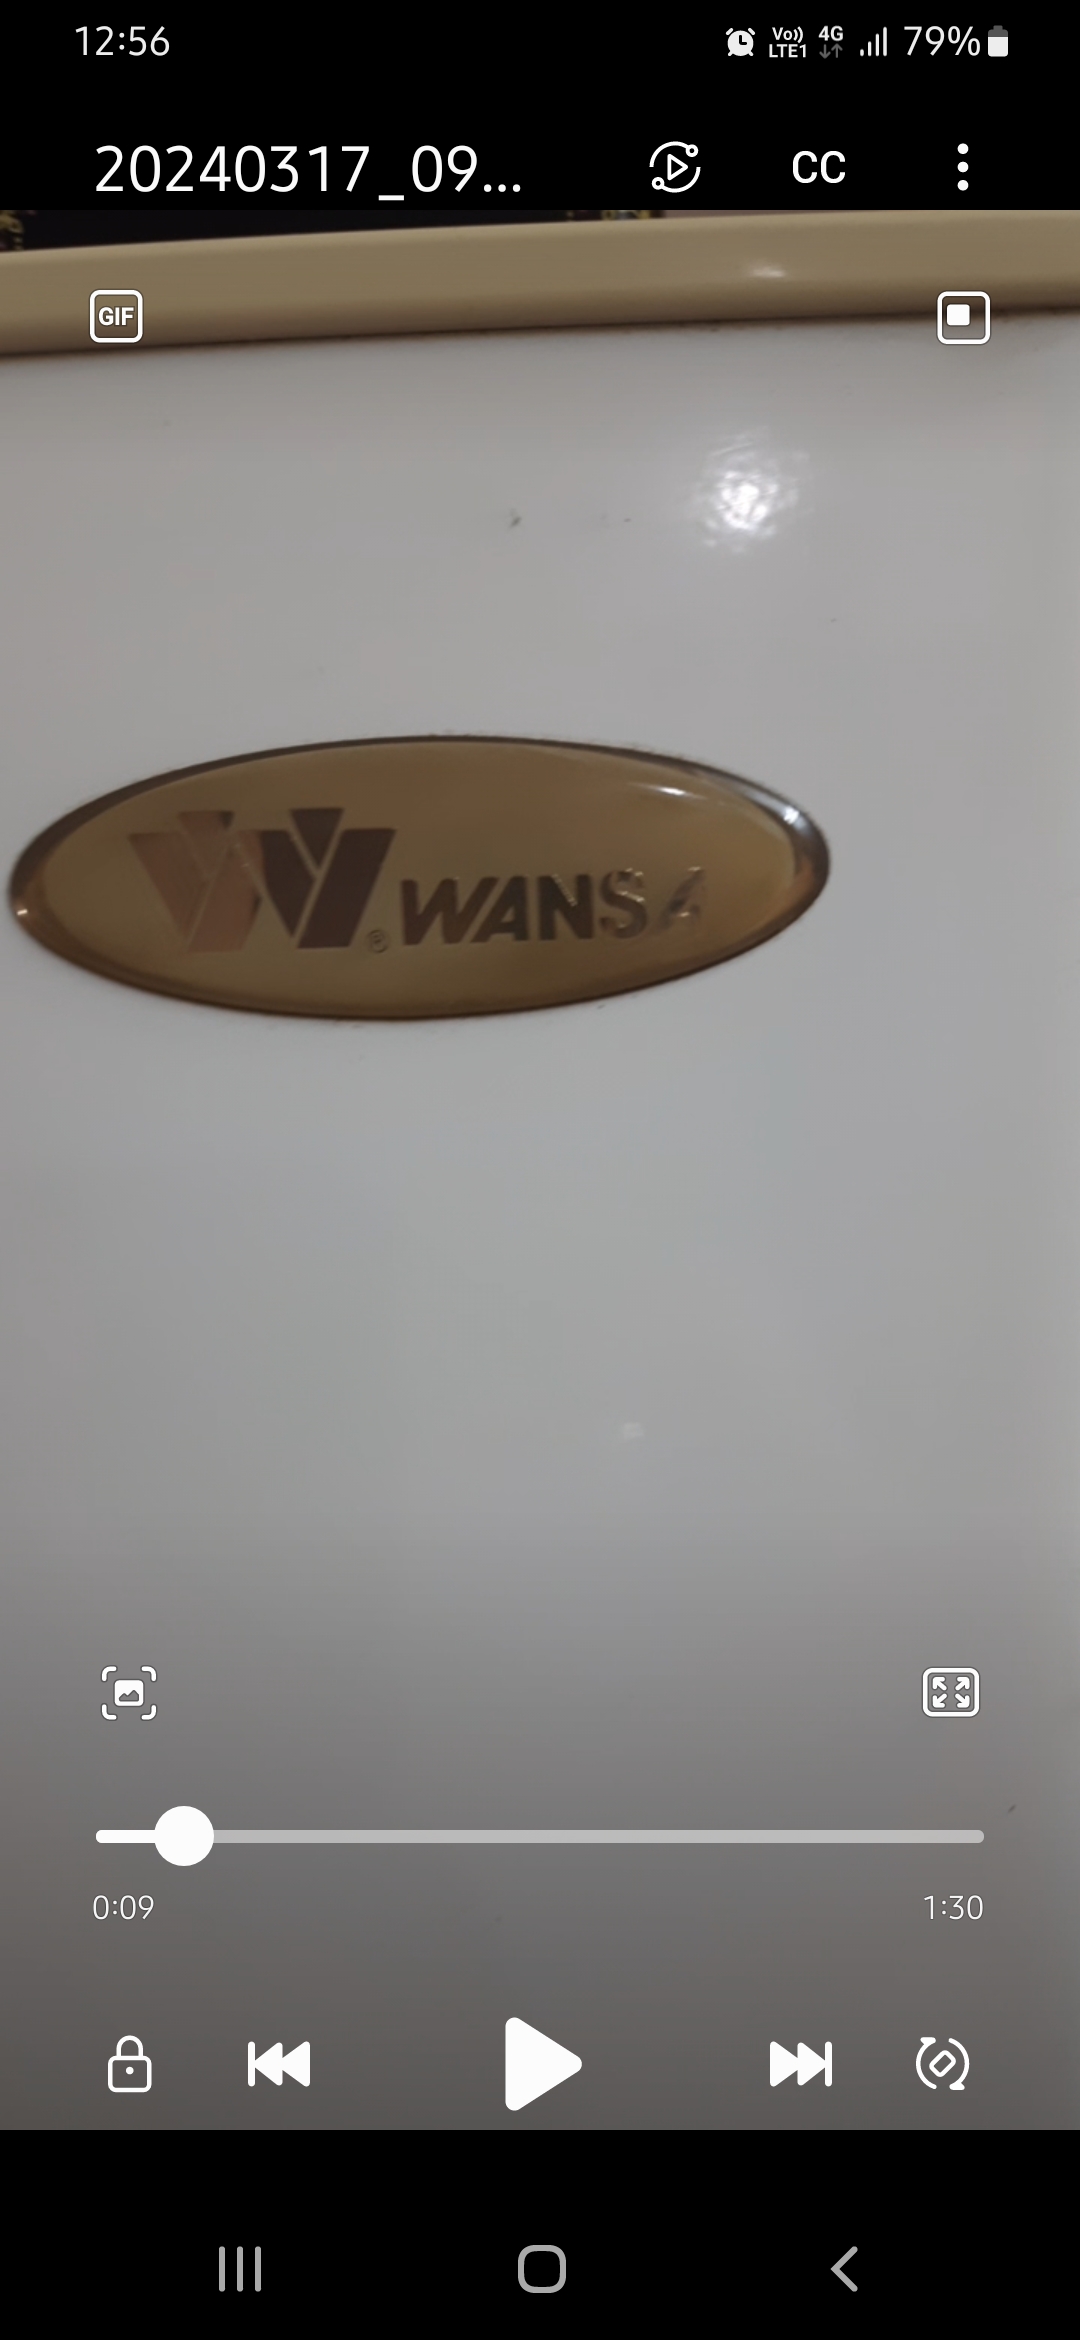 Wansa fridge for sale. 360 ltr. Excellent condition. Please call on 60705219.